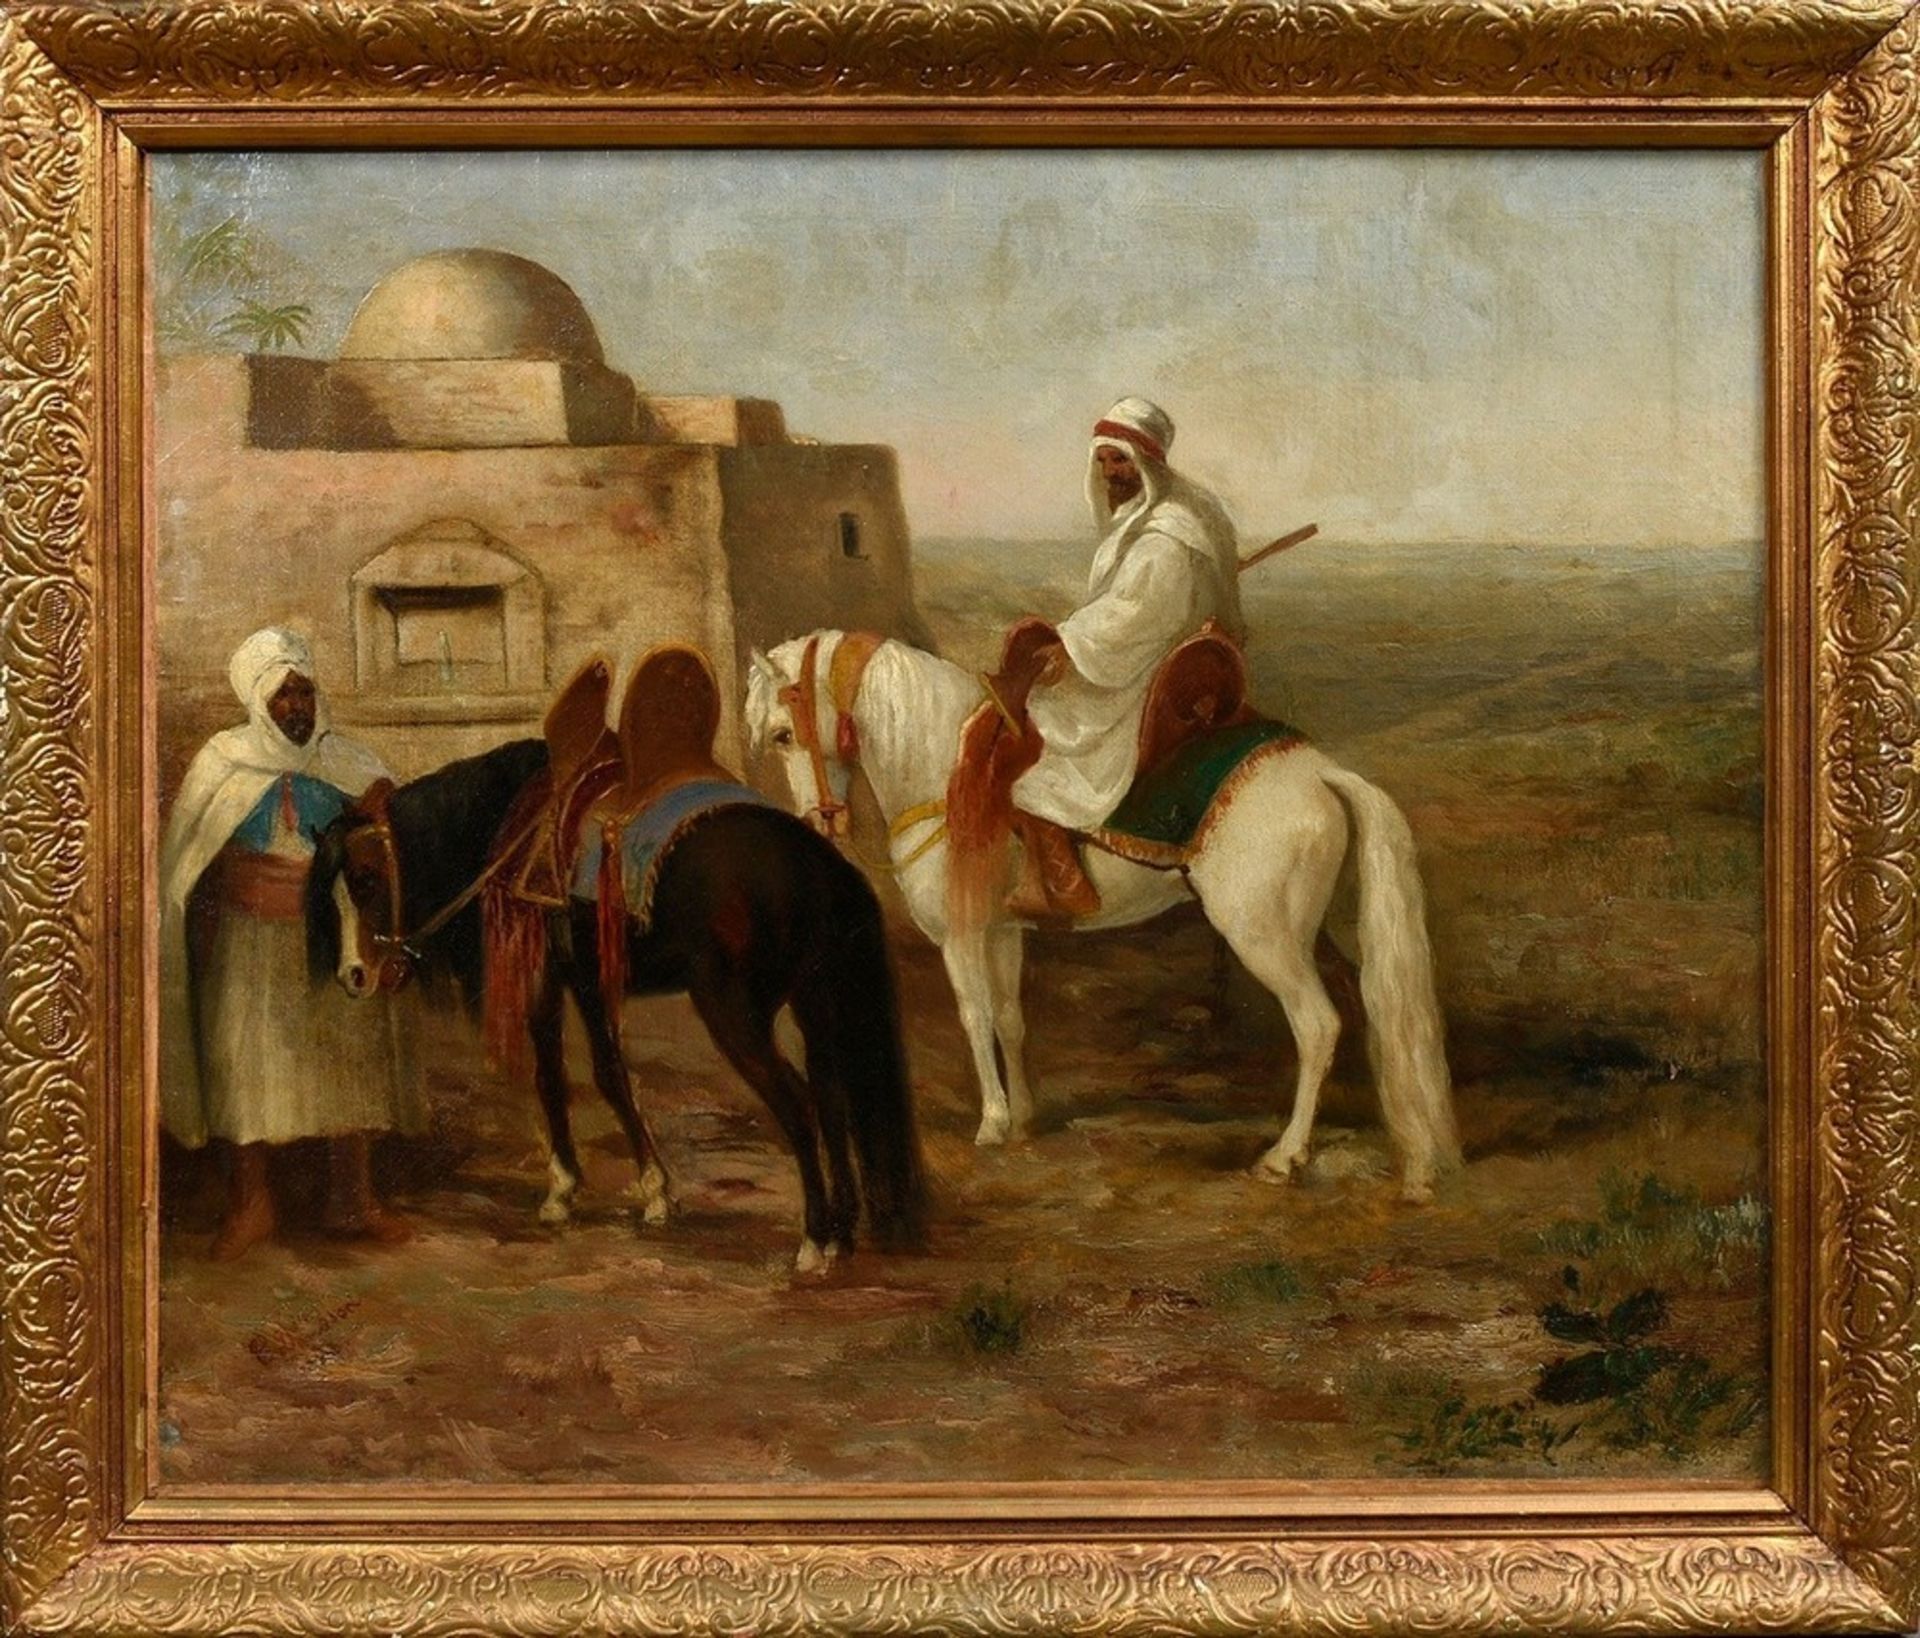 Davidson, Charles Grant (1824-1902) "Two Arabs with Horses outside the City", oil/canvas probably d - Image 2 of 3